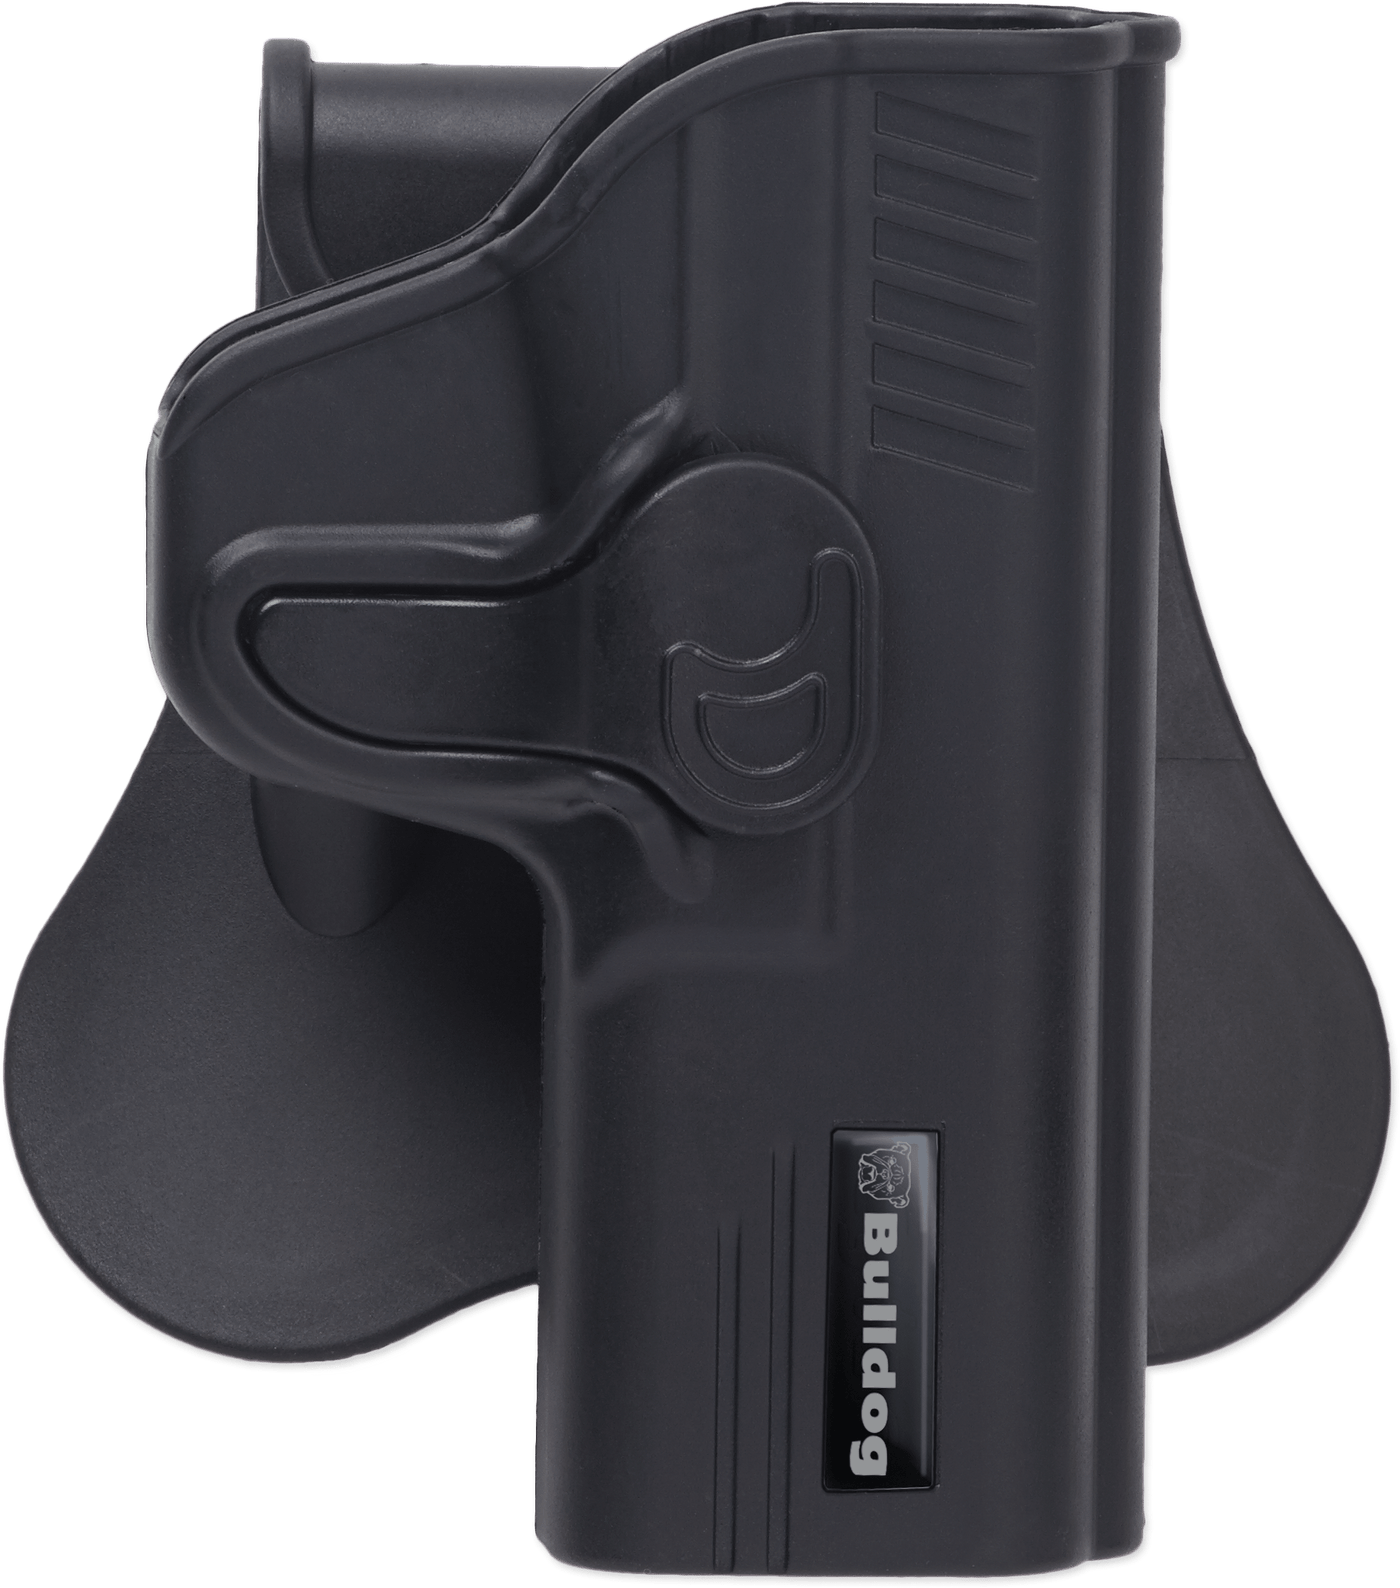 Bulldog Bulldog Rr Holster Paddle Poly - S&w M&p Compact Black Rh Holsters And Related Items